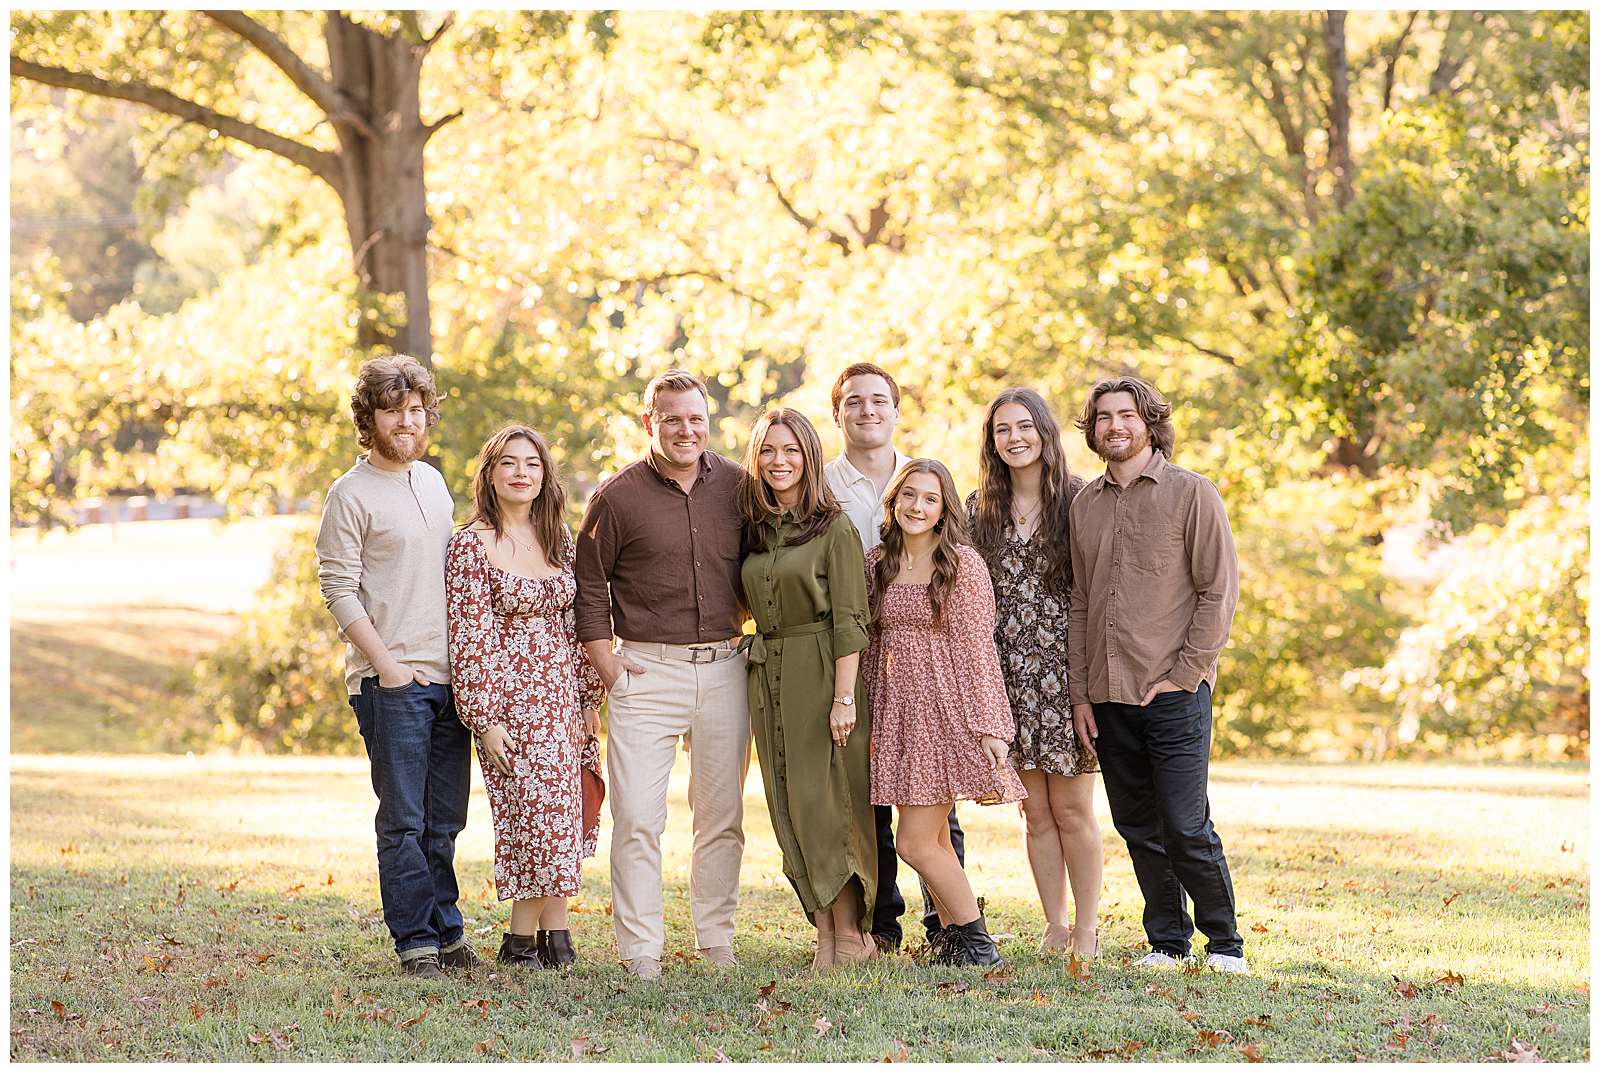 Fall Family Session with grown children to show how to do family sessions with photography educator, Rebecca Rice.  The family coordinates in olive greens, cranberry, brown, tan, and denim colors.  Mom and Dad stand in the middle with 4 children on their right and 2 on their left.